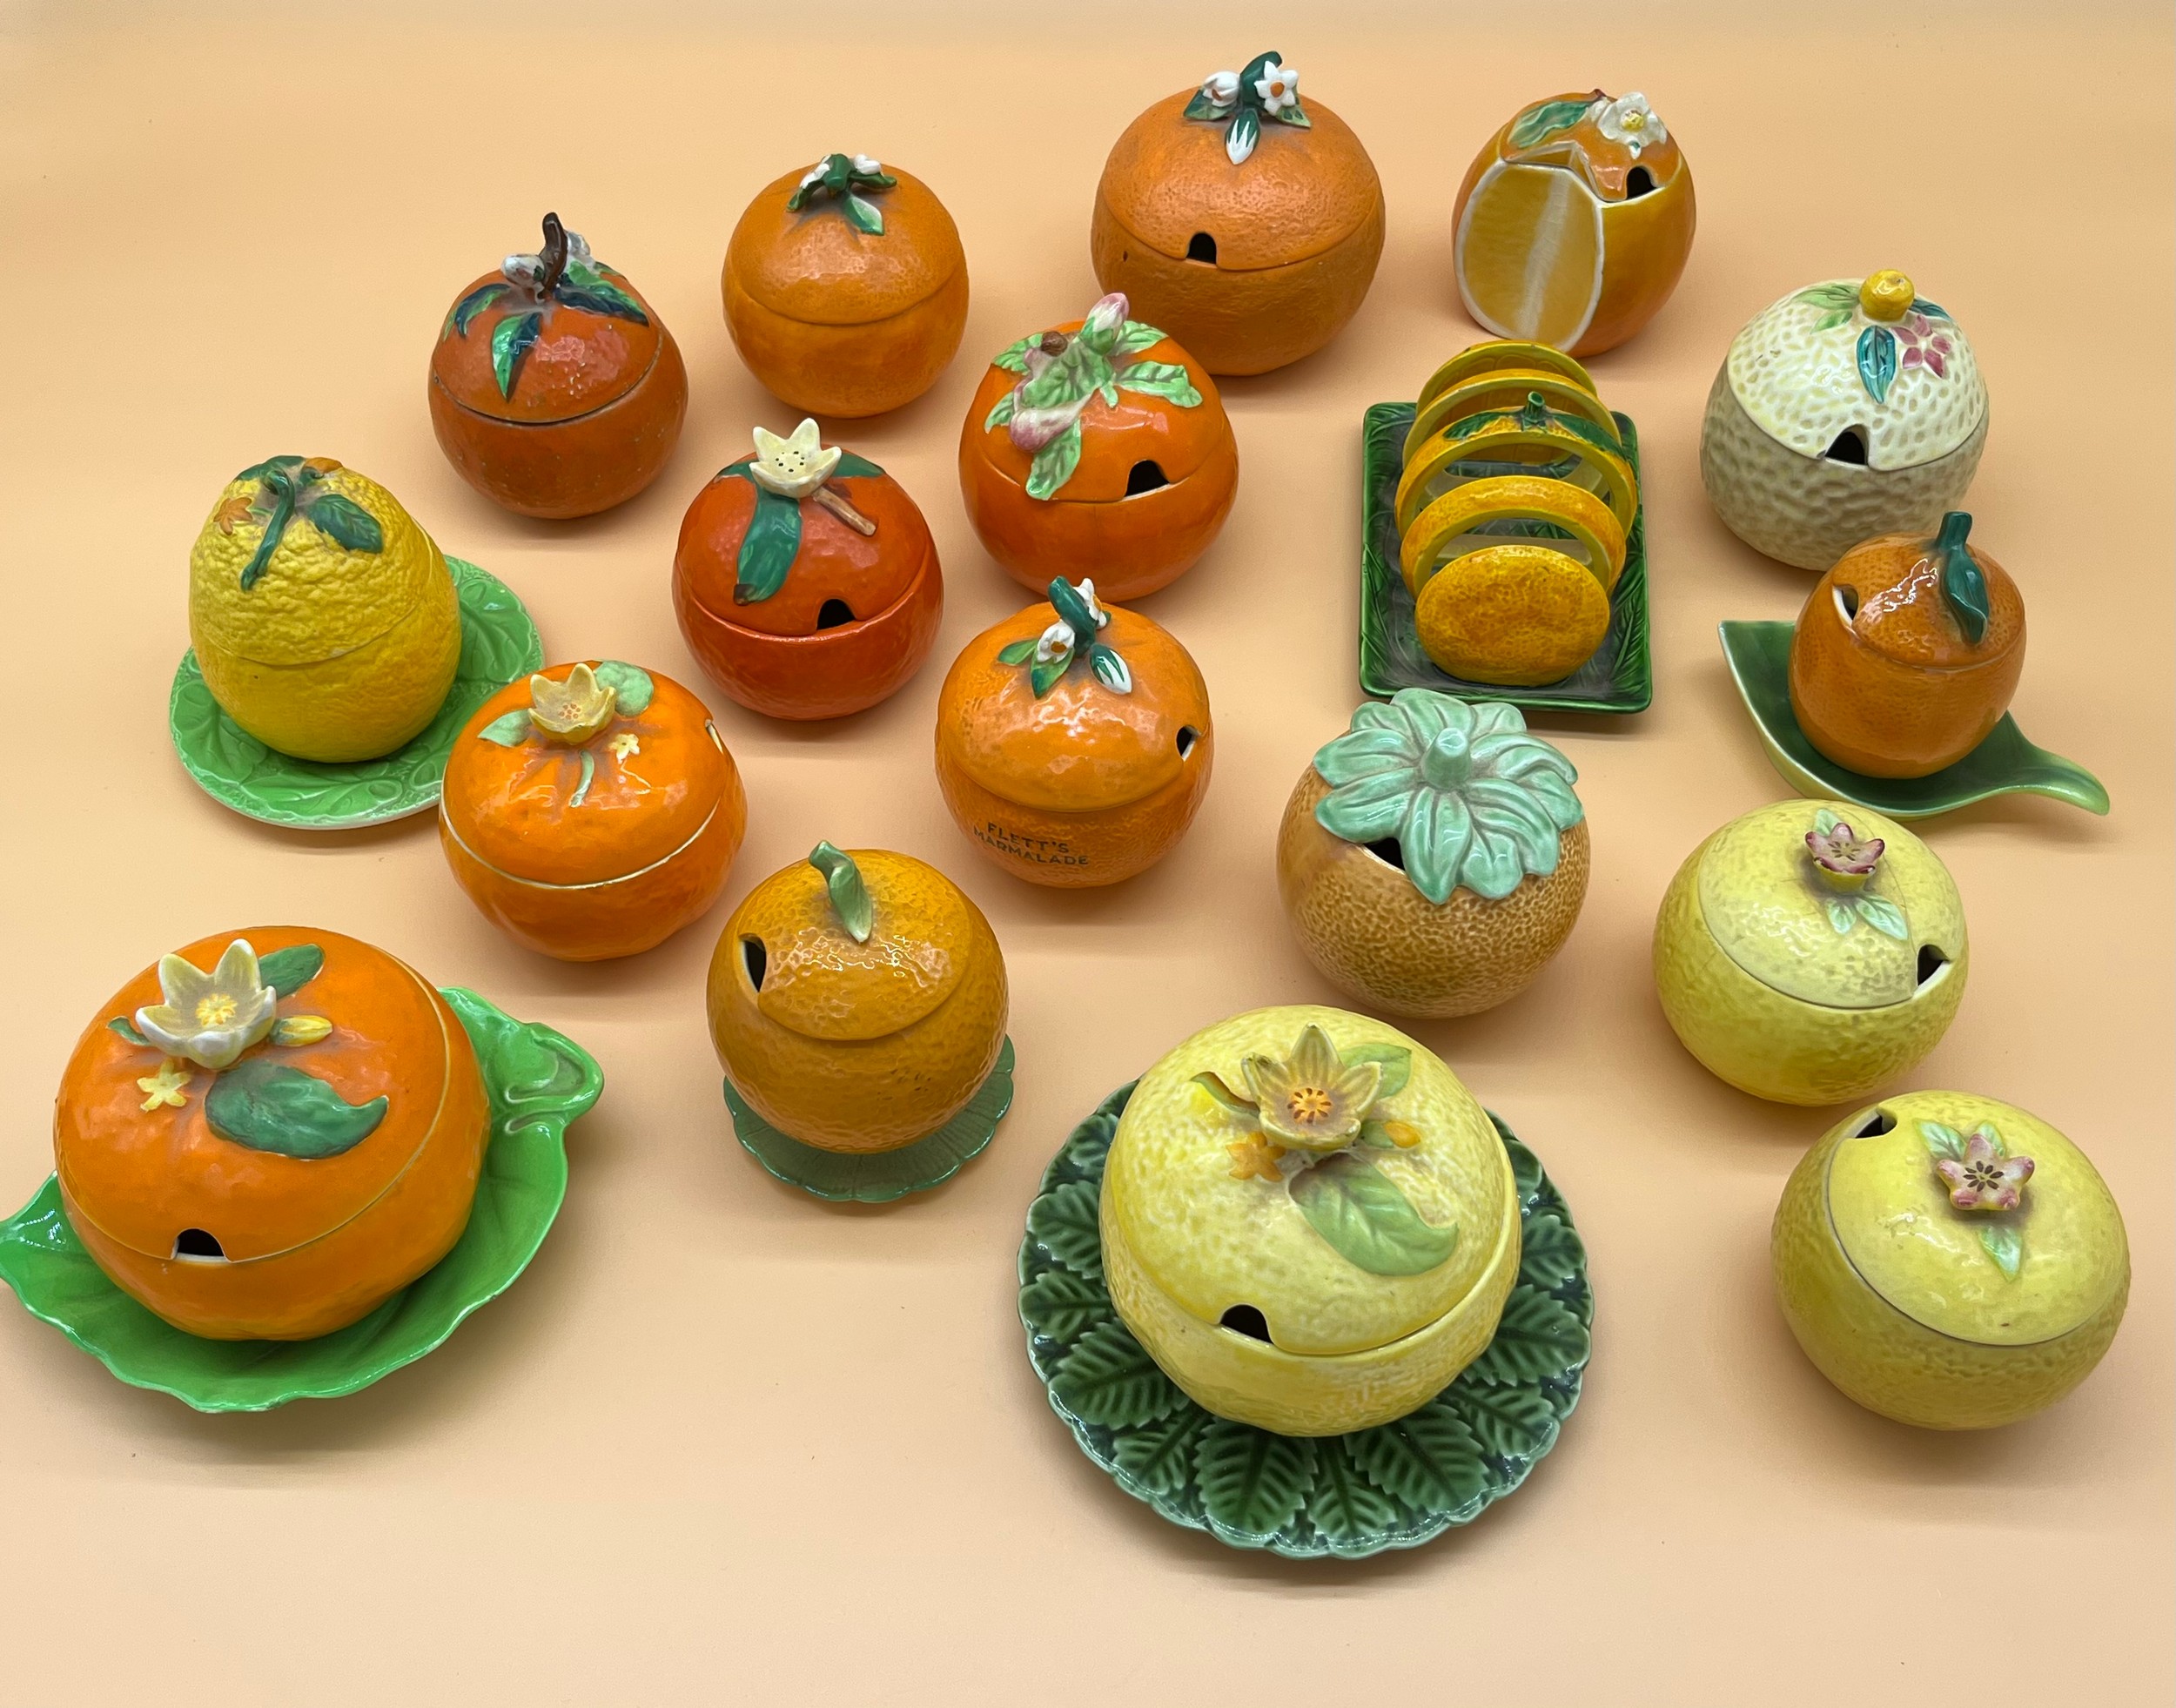 A Collection of various porcelain makers marmalade preserve pots in the form of oranges and